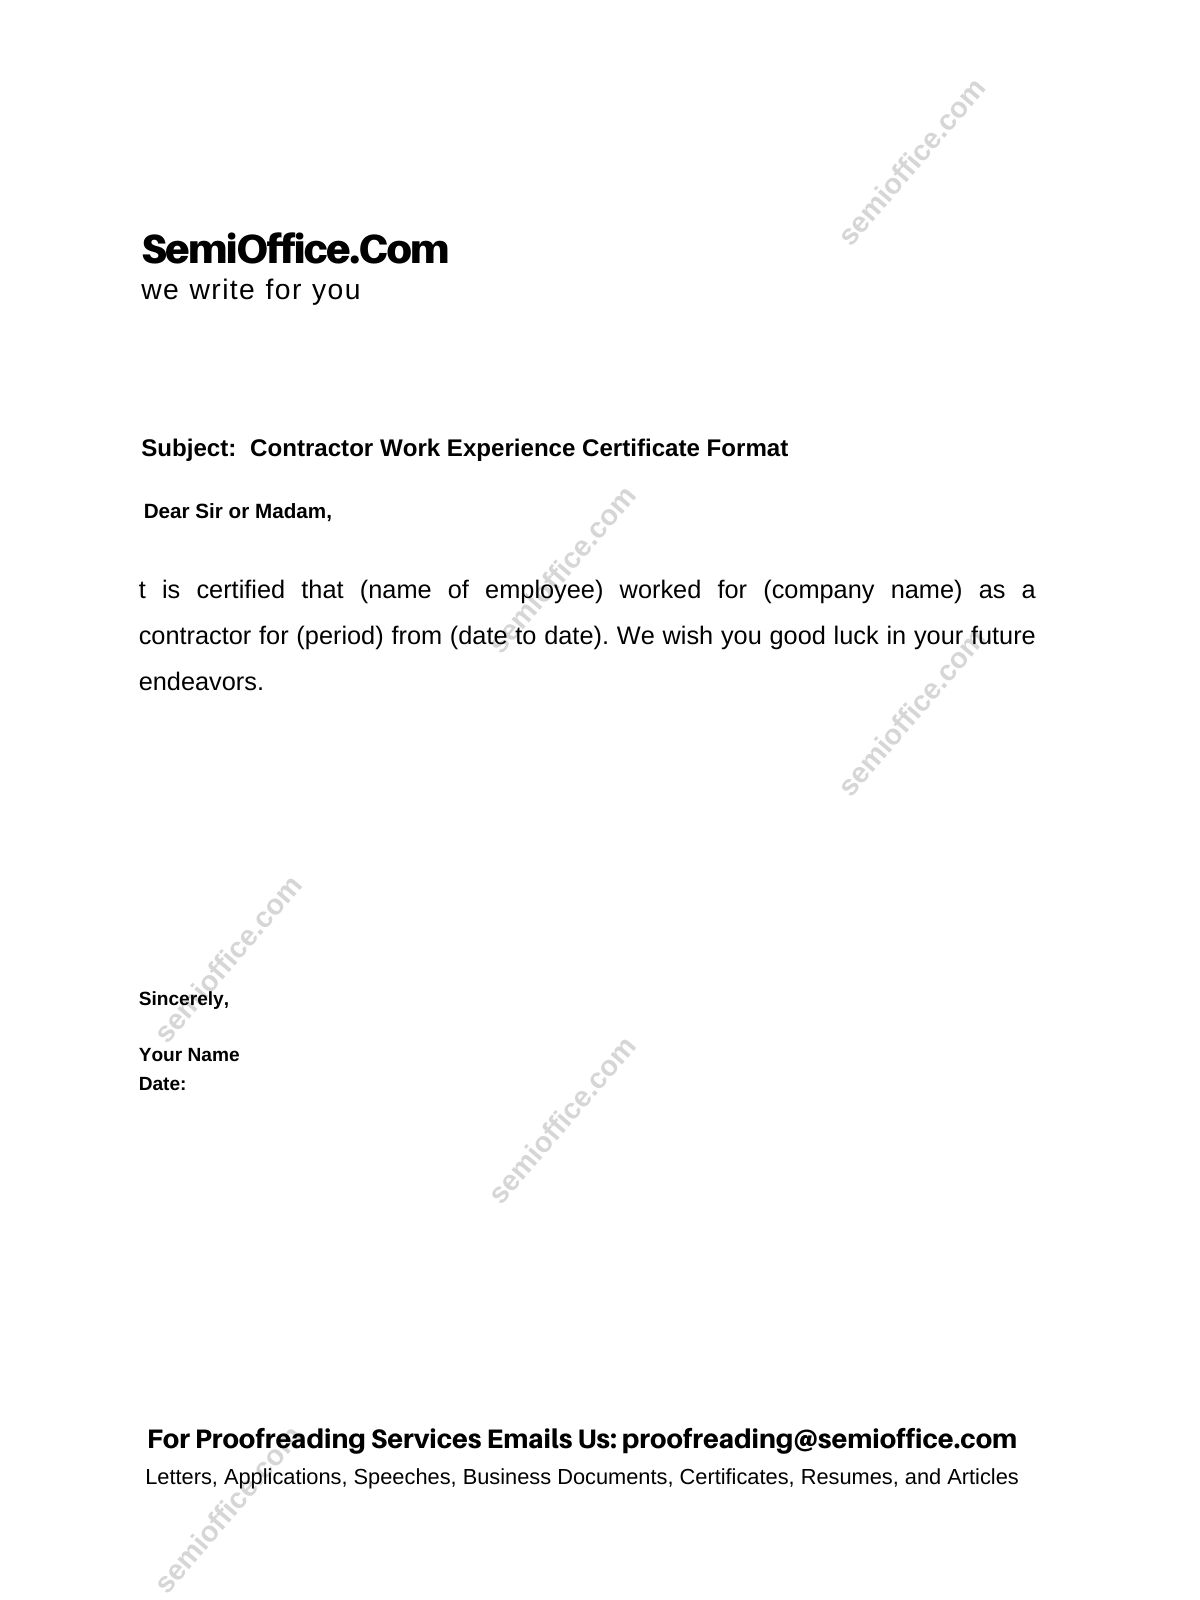 contract-work-experience-certificate-for-employees-workers-staff-semioffice-com